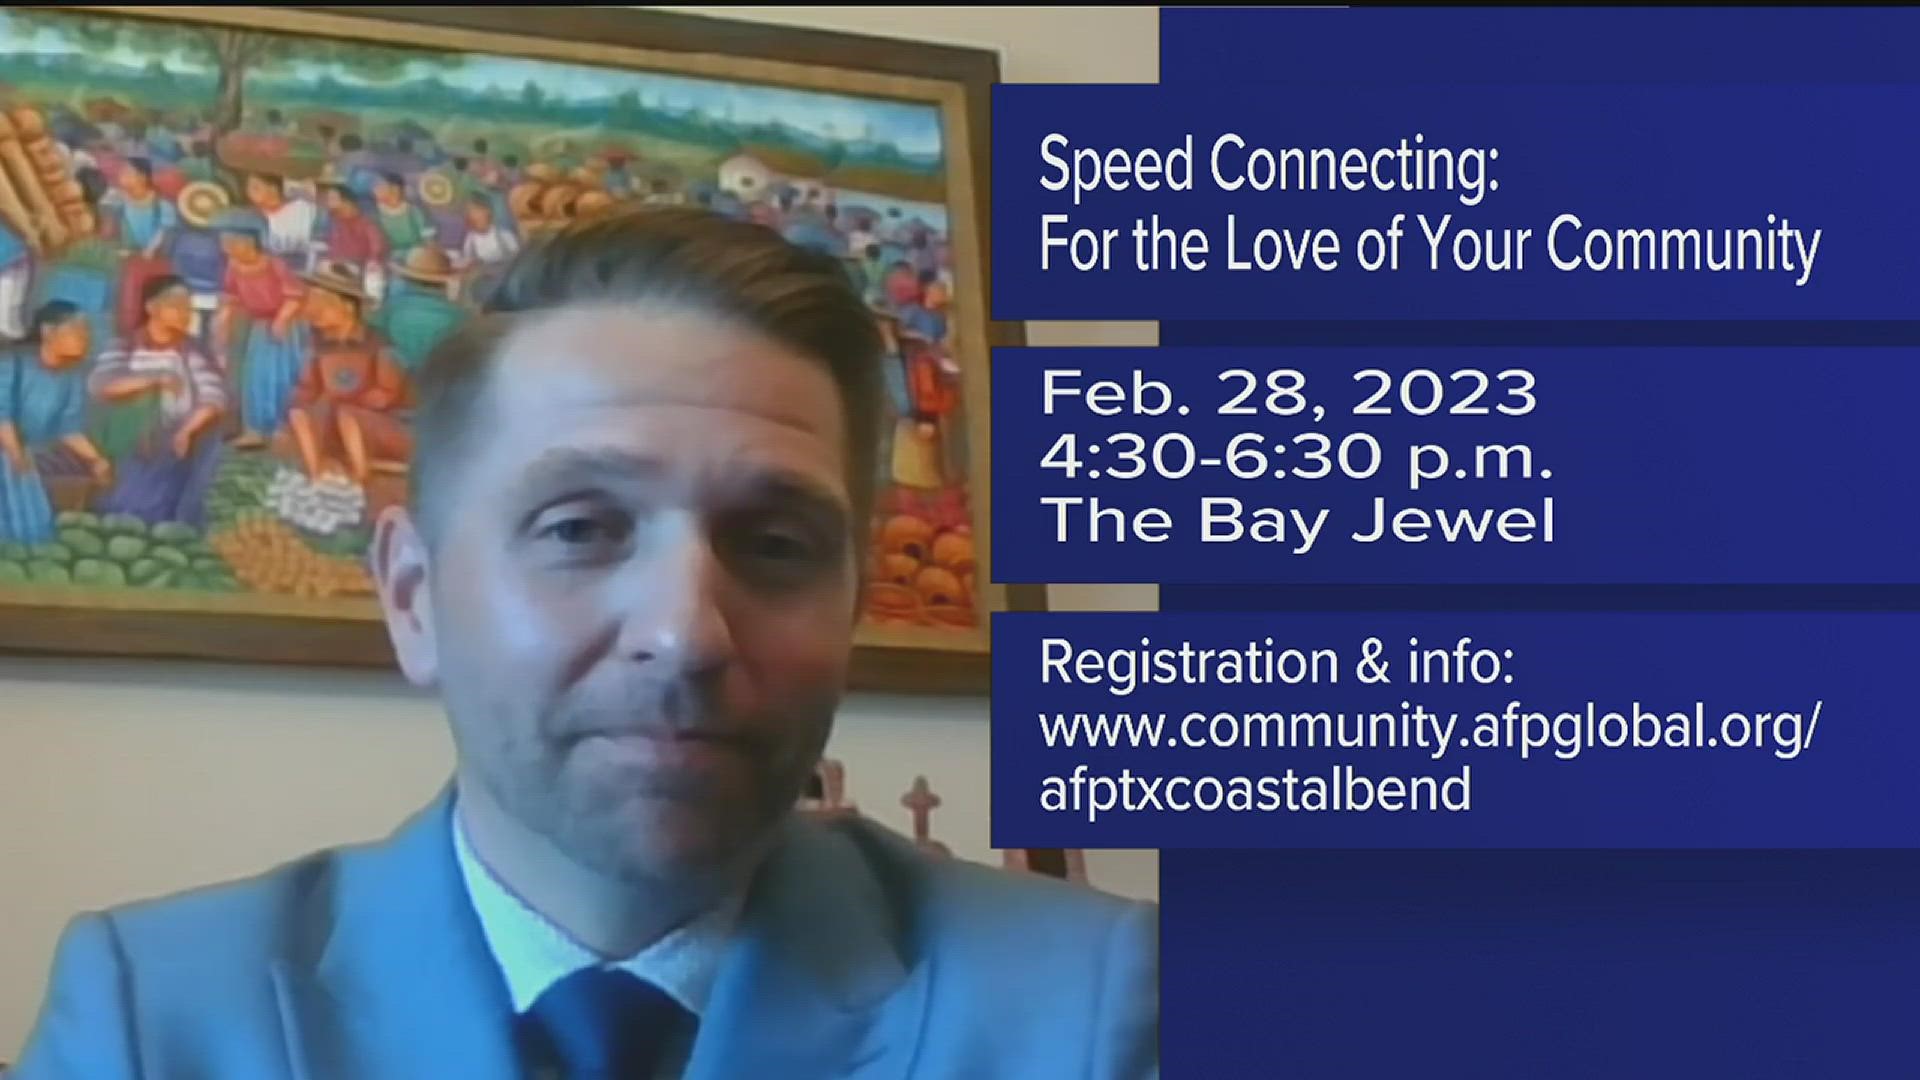 The Assoc. of Fundraising Professionals' Jeff Grandy joined us live to tell local non-profits how they can learn to fundraise at their Speed Connecting event.